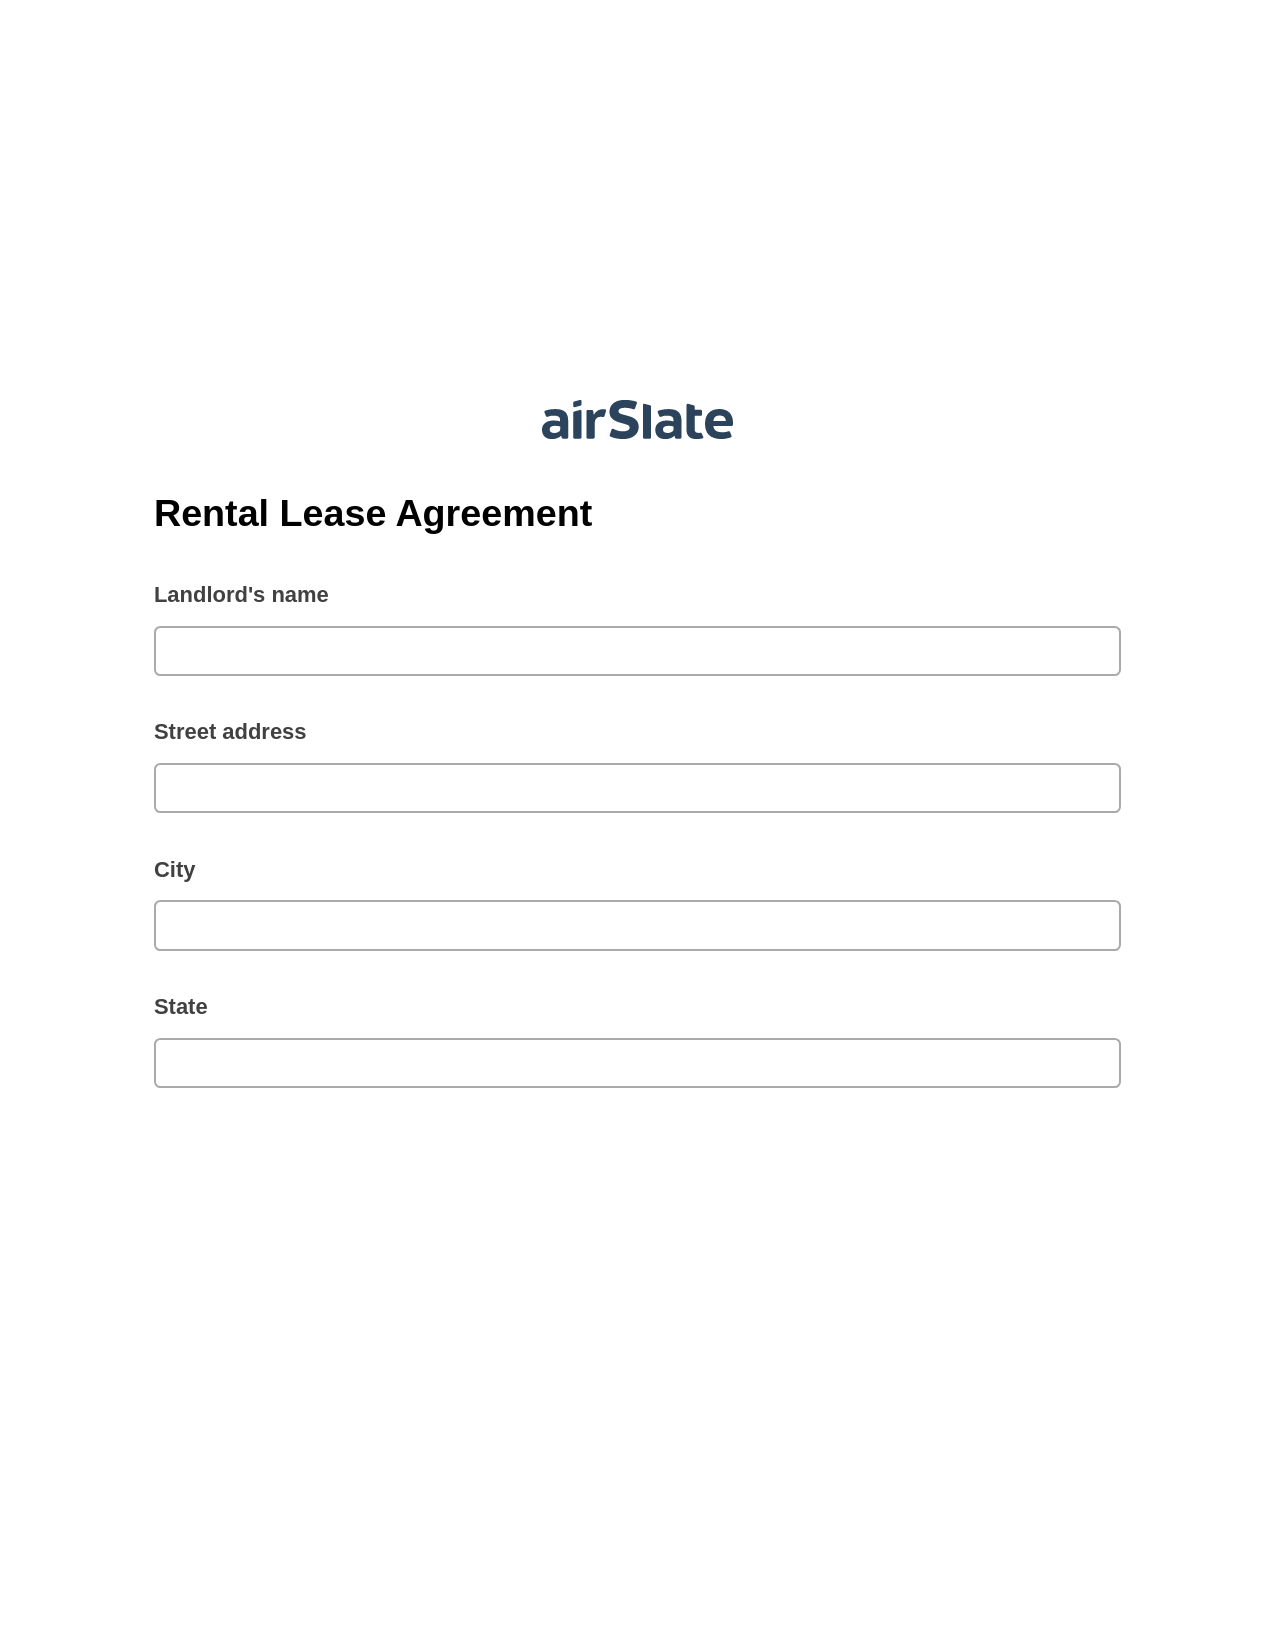 Rental Lease Agreement Pre-fill Slate from MS Dynamics 365 Records Bot, Invoke Salesforce Process Bot, Export to Formstack Documents Bot